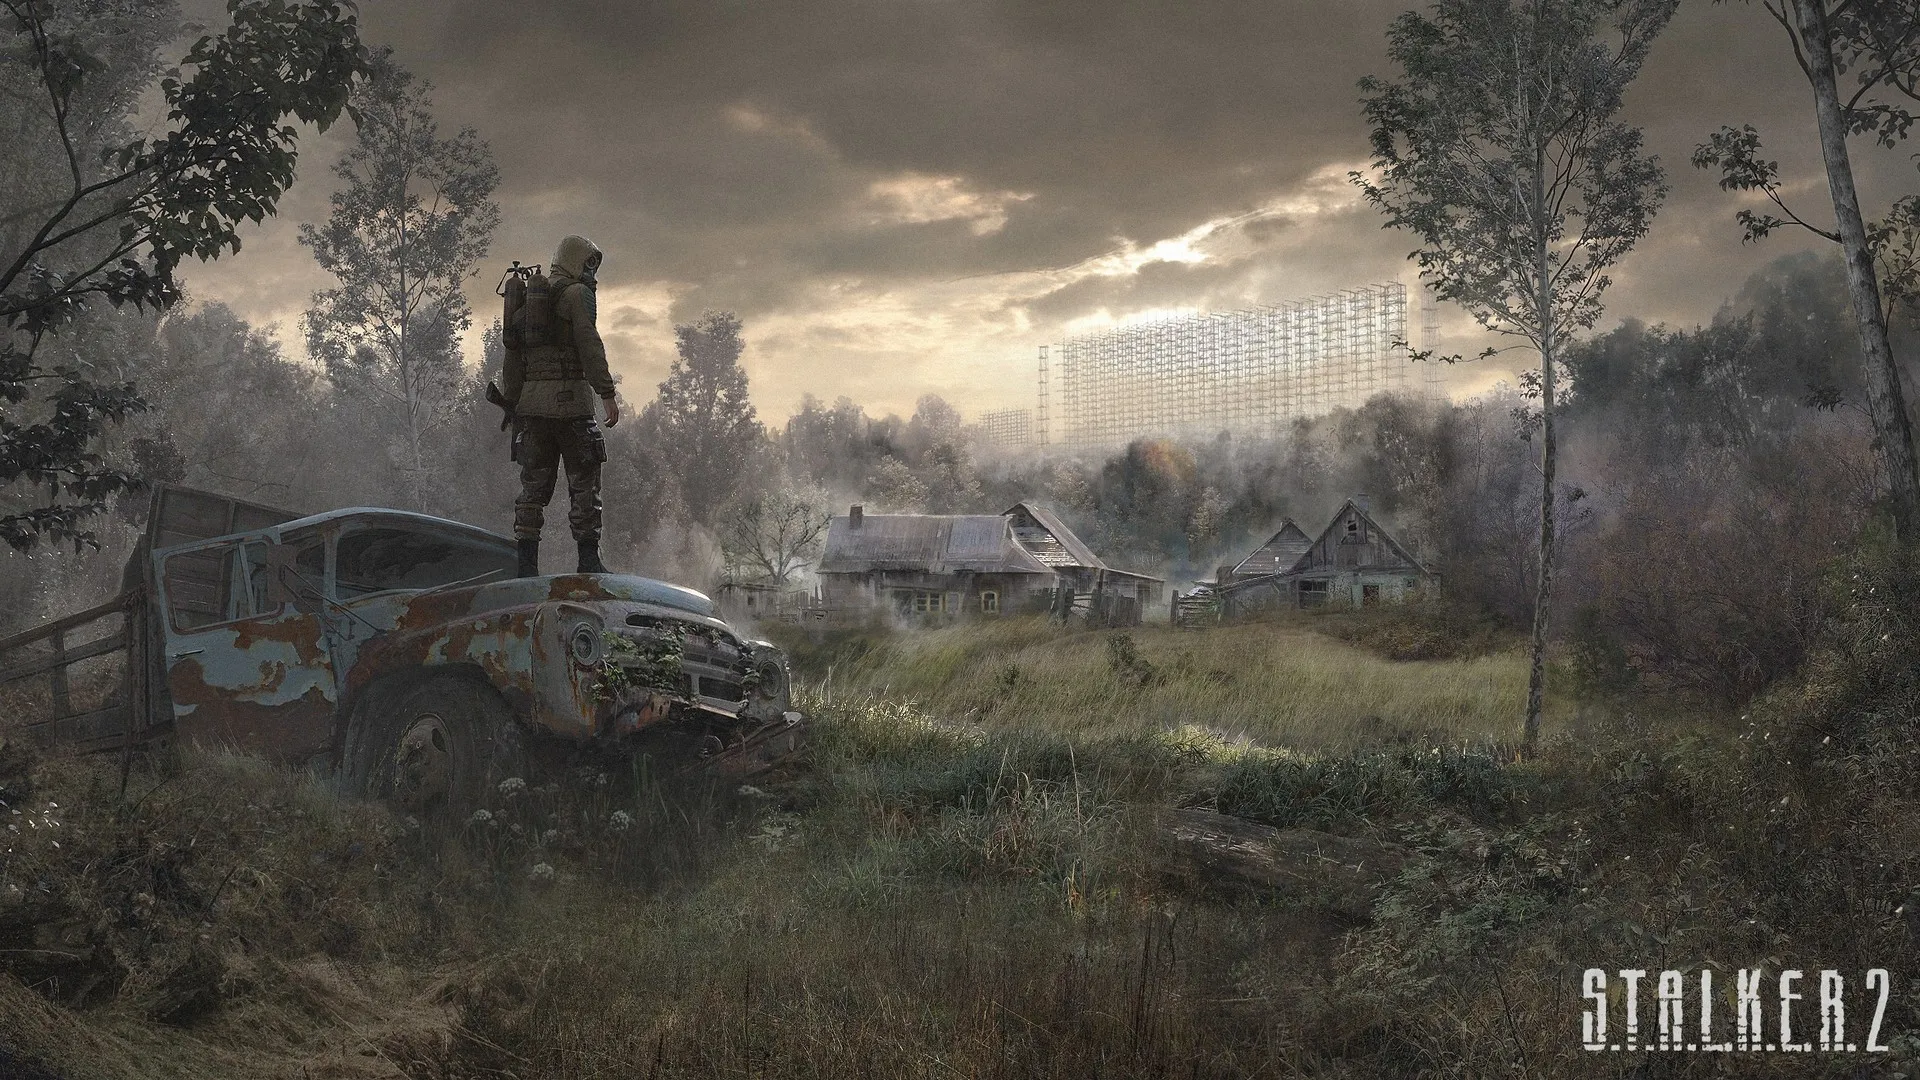 S.T.A.L.K.E.R. 2: Heart of Chornobyl — Official 'Come to Me